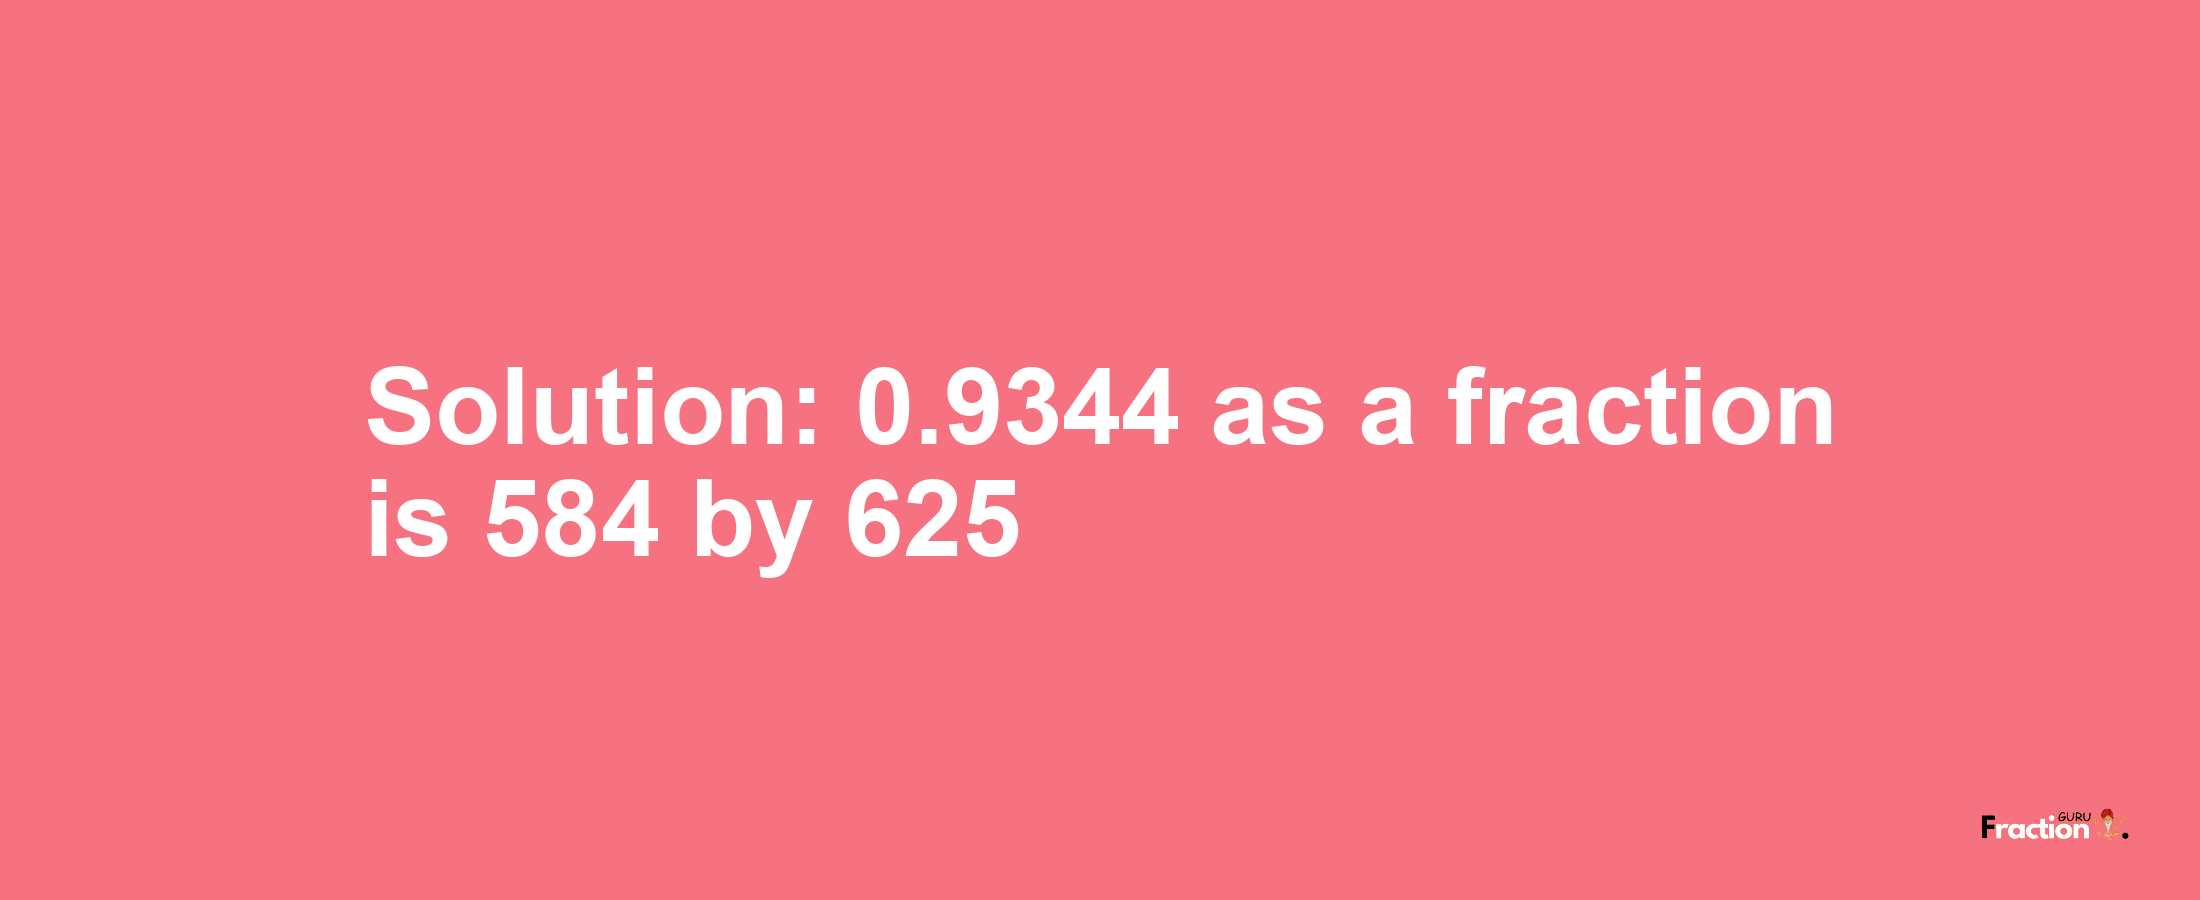 Solution:0.9344 as a fraction is 584/625